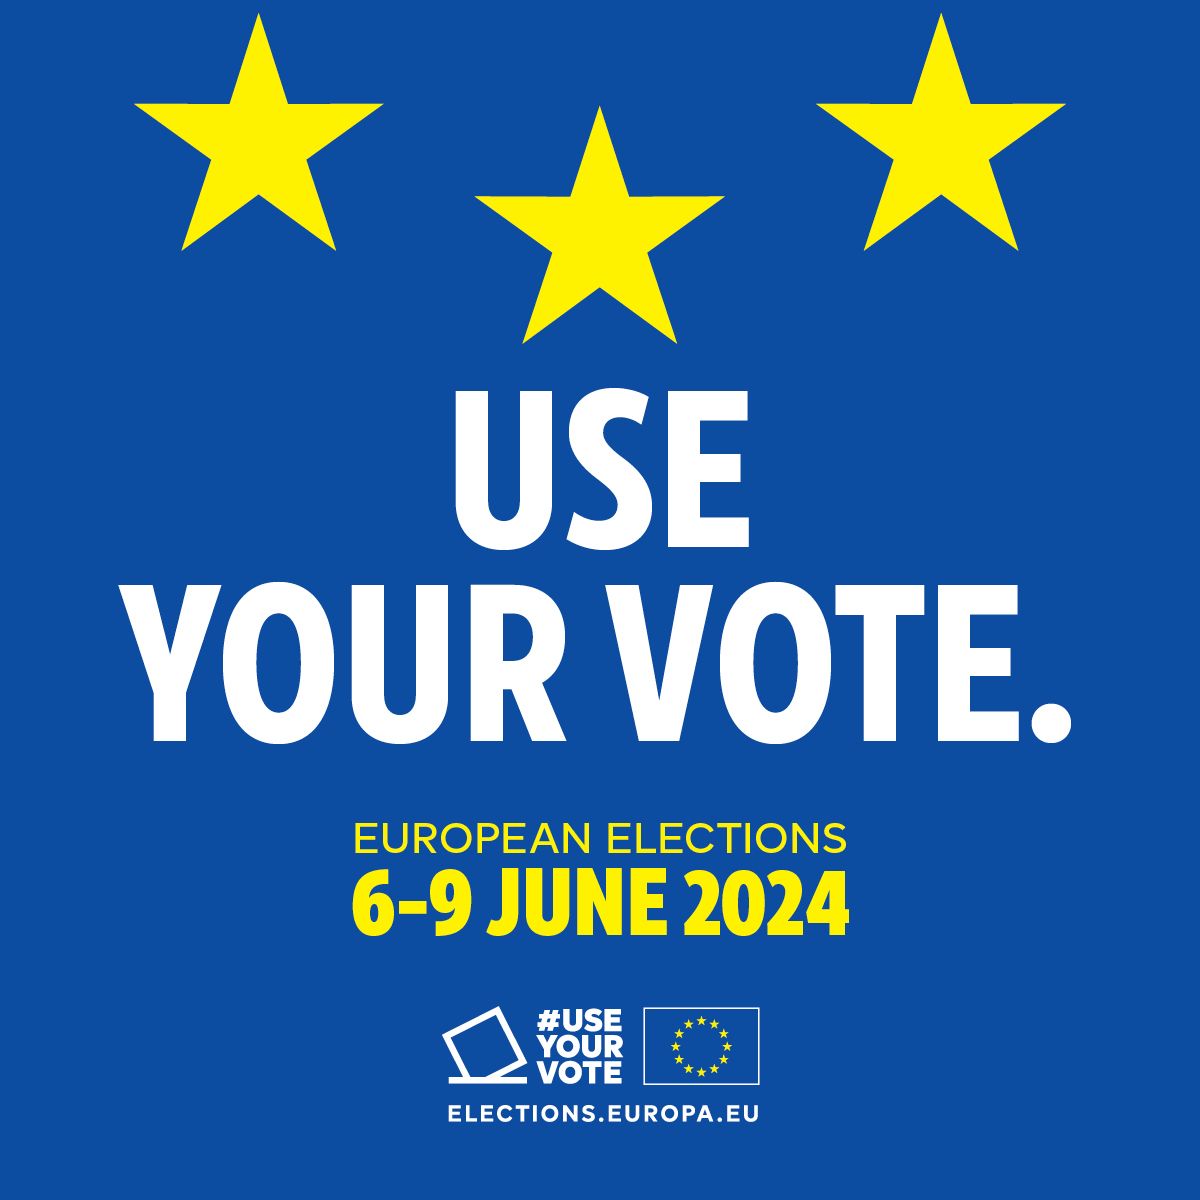 Use your vote this June so we can build a Europe for all ages! Find out how 👉 elections.europa.eu #UseYourVote @Europarl_EN #euelections2024 #EU2024 #EE2024 #EuropeanUnion